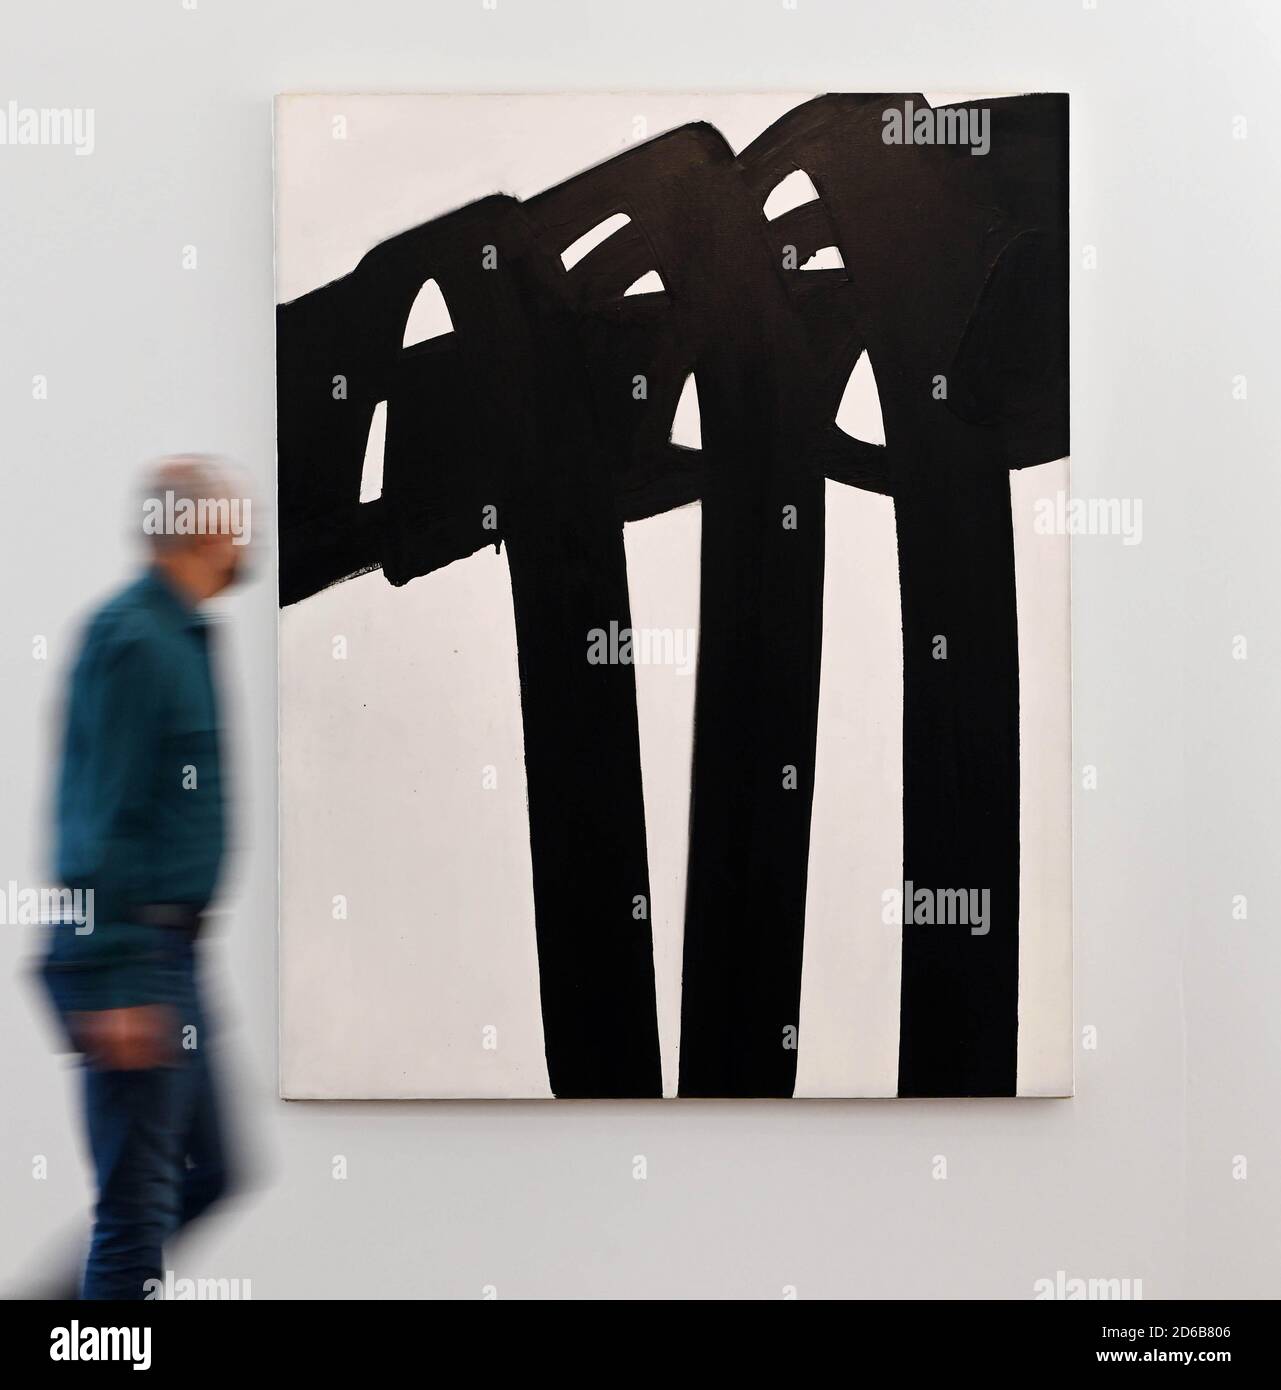 Baden Baden, Germany. 14th Oct, 2020. The Museum Frieder Burda is showing the work 'Peinture 190 x 150 cm' from 1970 by the artist Pierre Soulages. This is part of the exhibition 'SOULAGES. Painting 1946 - 2019' which is on display at the museum from 17 October 2020 to 28 February 2021. (to dpa: ' Exhibition 'Soulages. Painting 1946 - 2019') Credit: Uli Deck/dpa/Alamy Live News Stock Photo